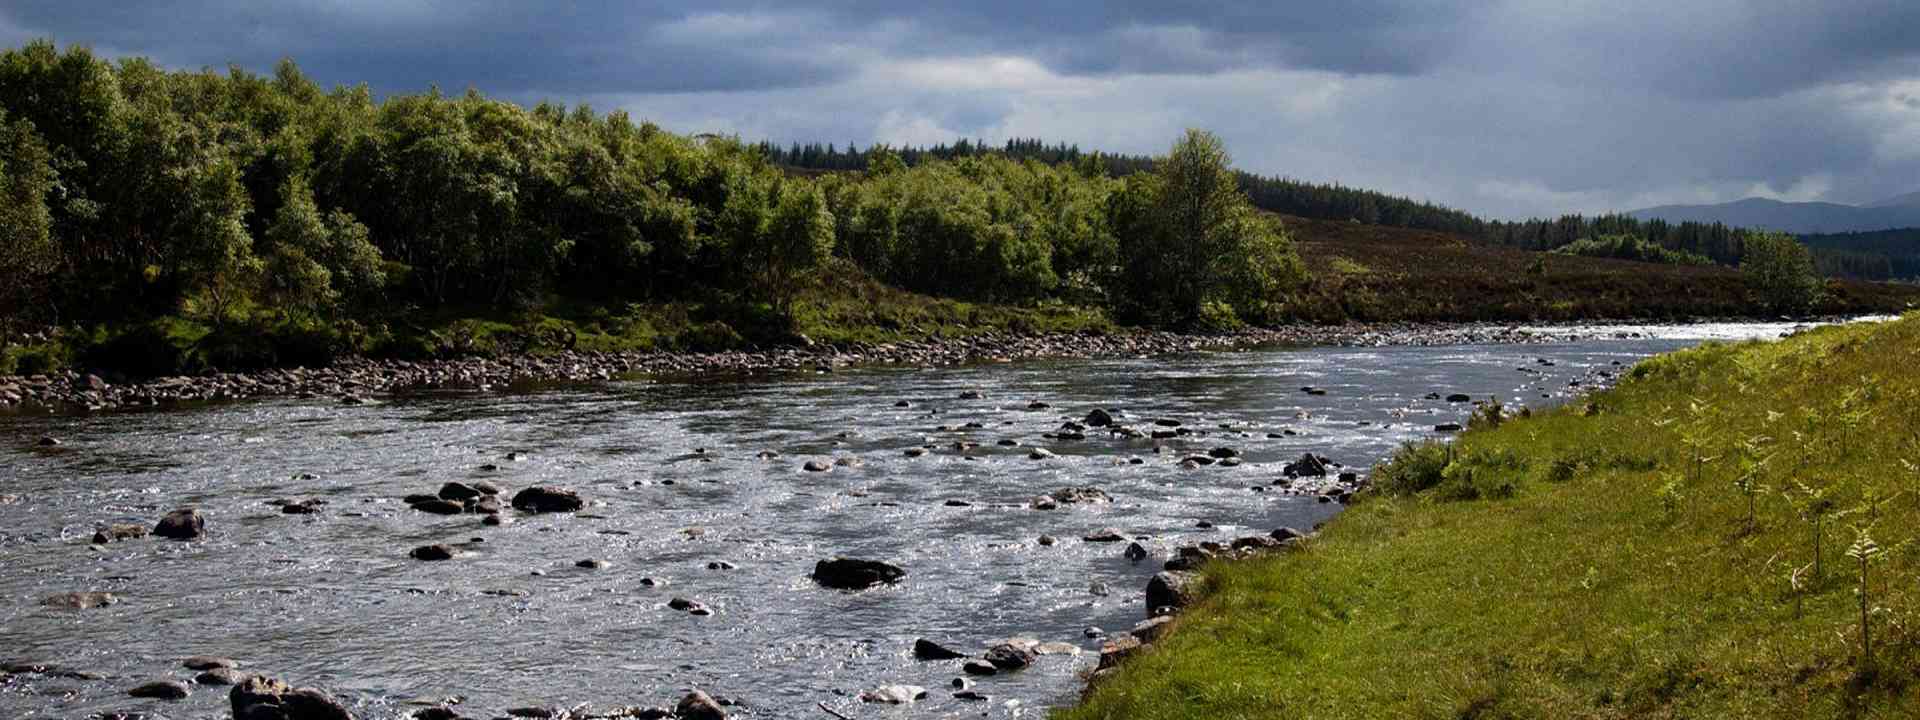 Salmon Fishing on the River Naver at Syre Estate in Sutherland, Scotland